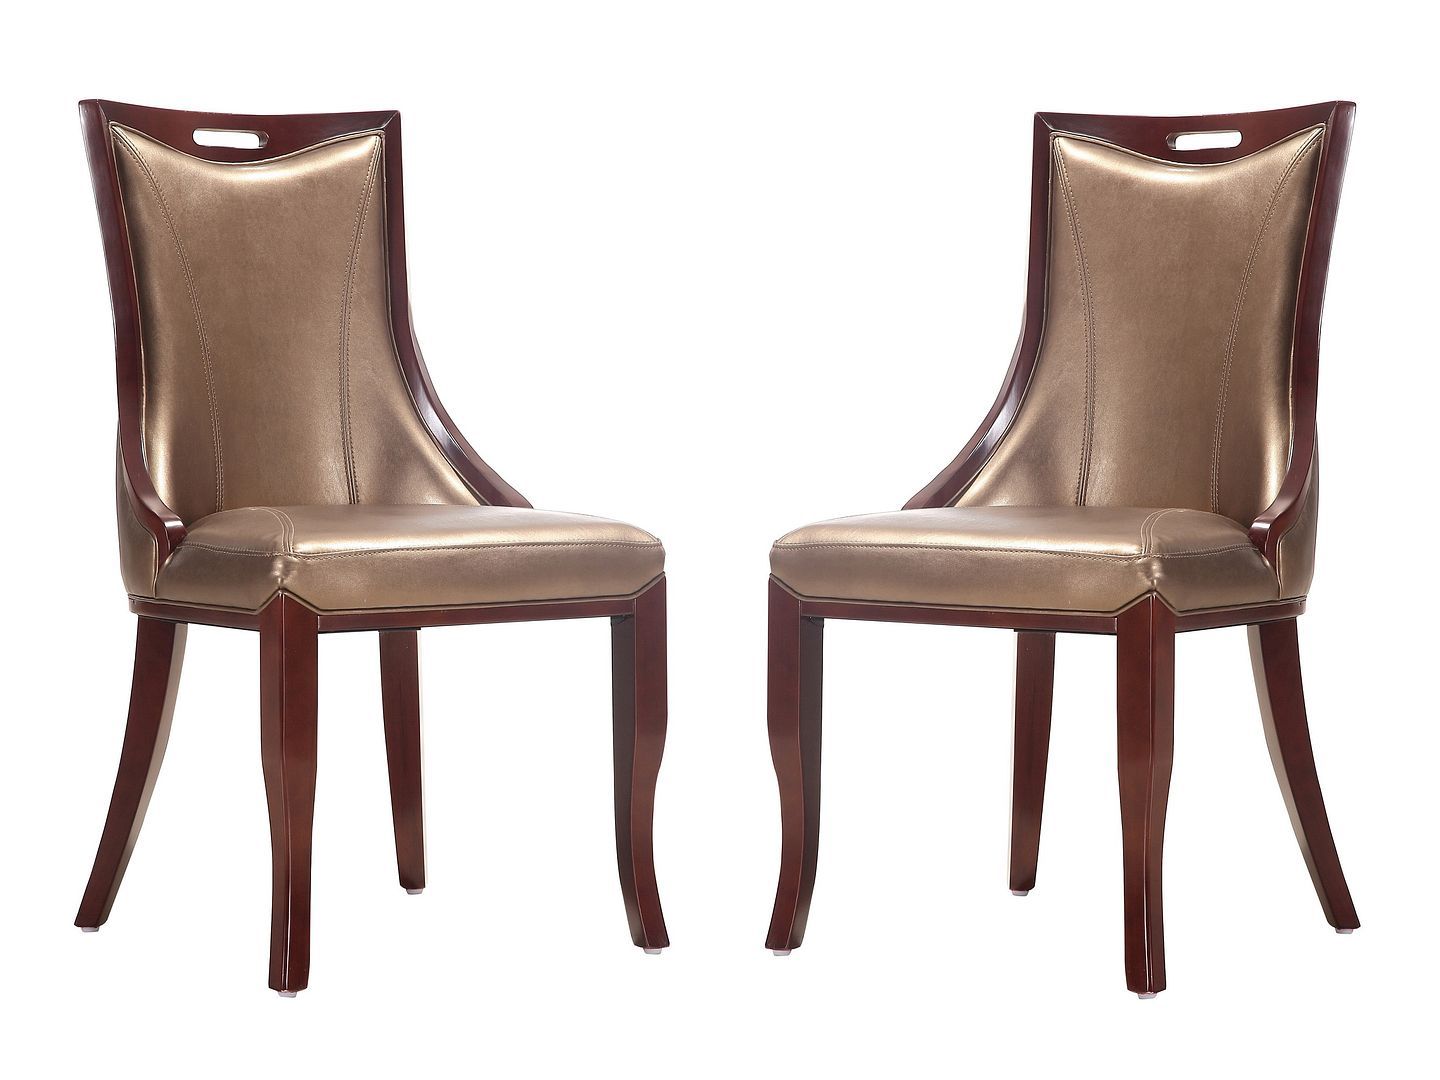 Emperor Dining Chair - Set of 2